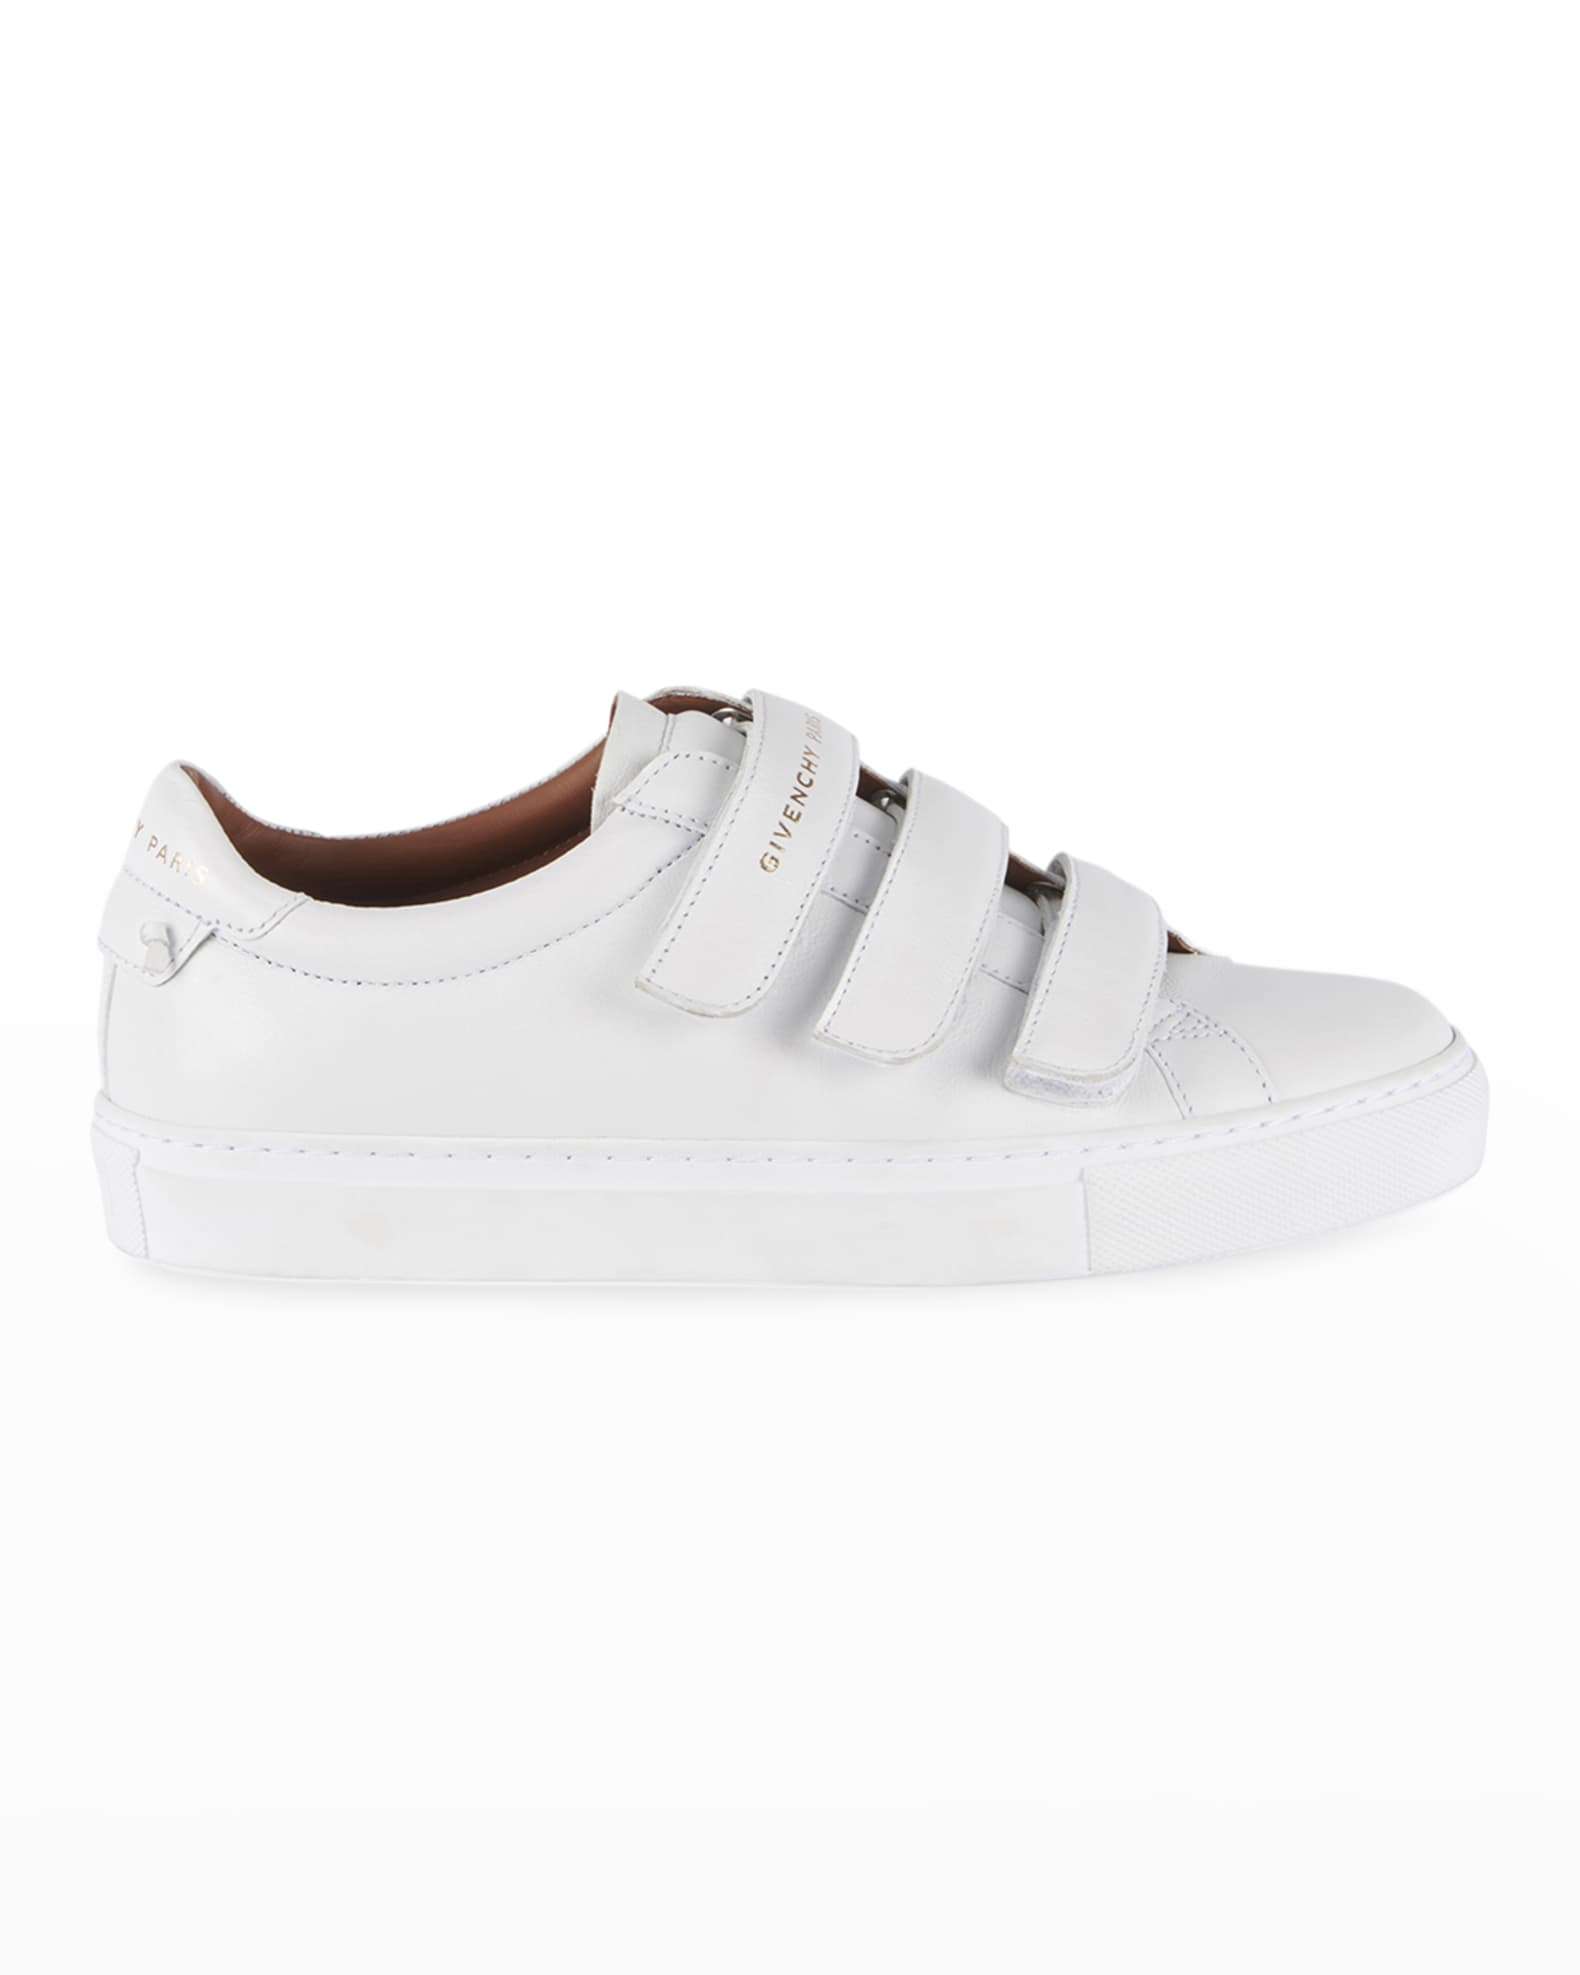 Givenchy Urban Street Low-Top Sneakers w/ Straps | Neiman Marcus